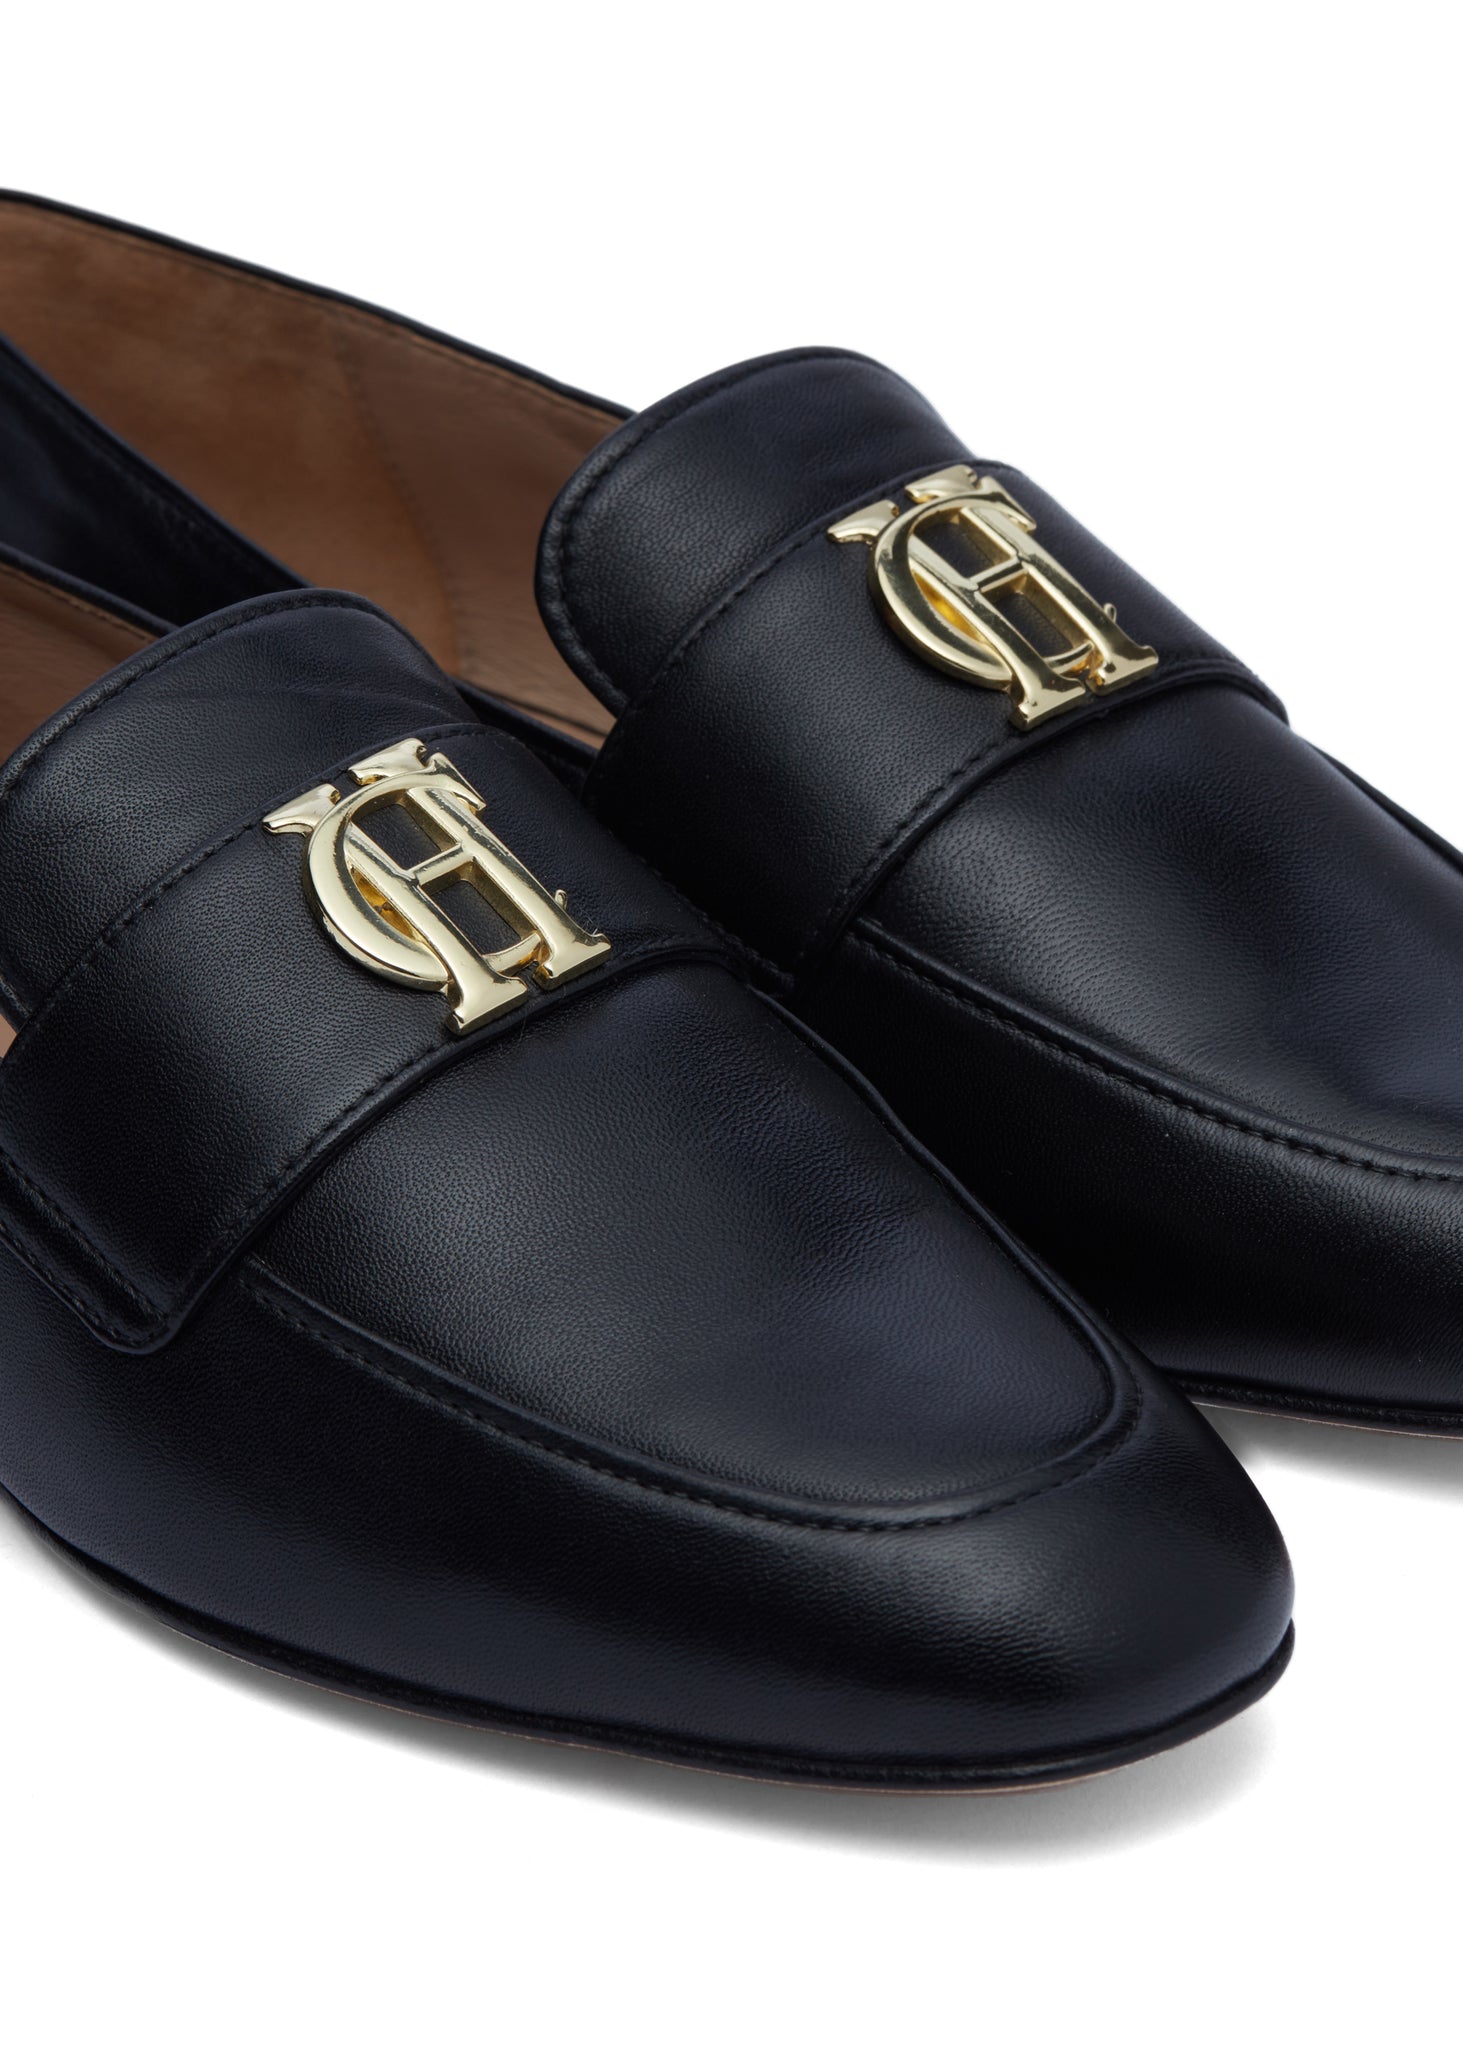 Close up of black leather loafers with a slightly pointed toe and gold hardware to the top